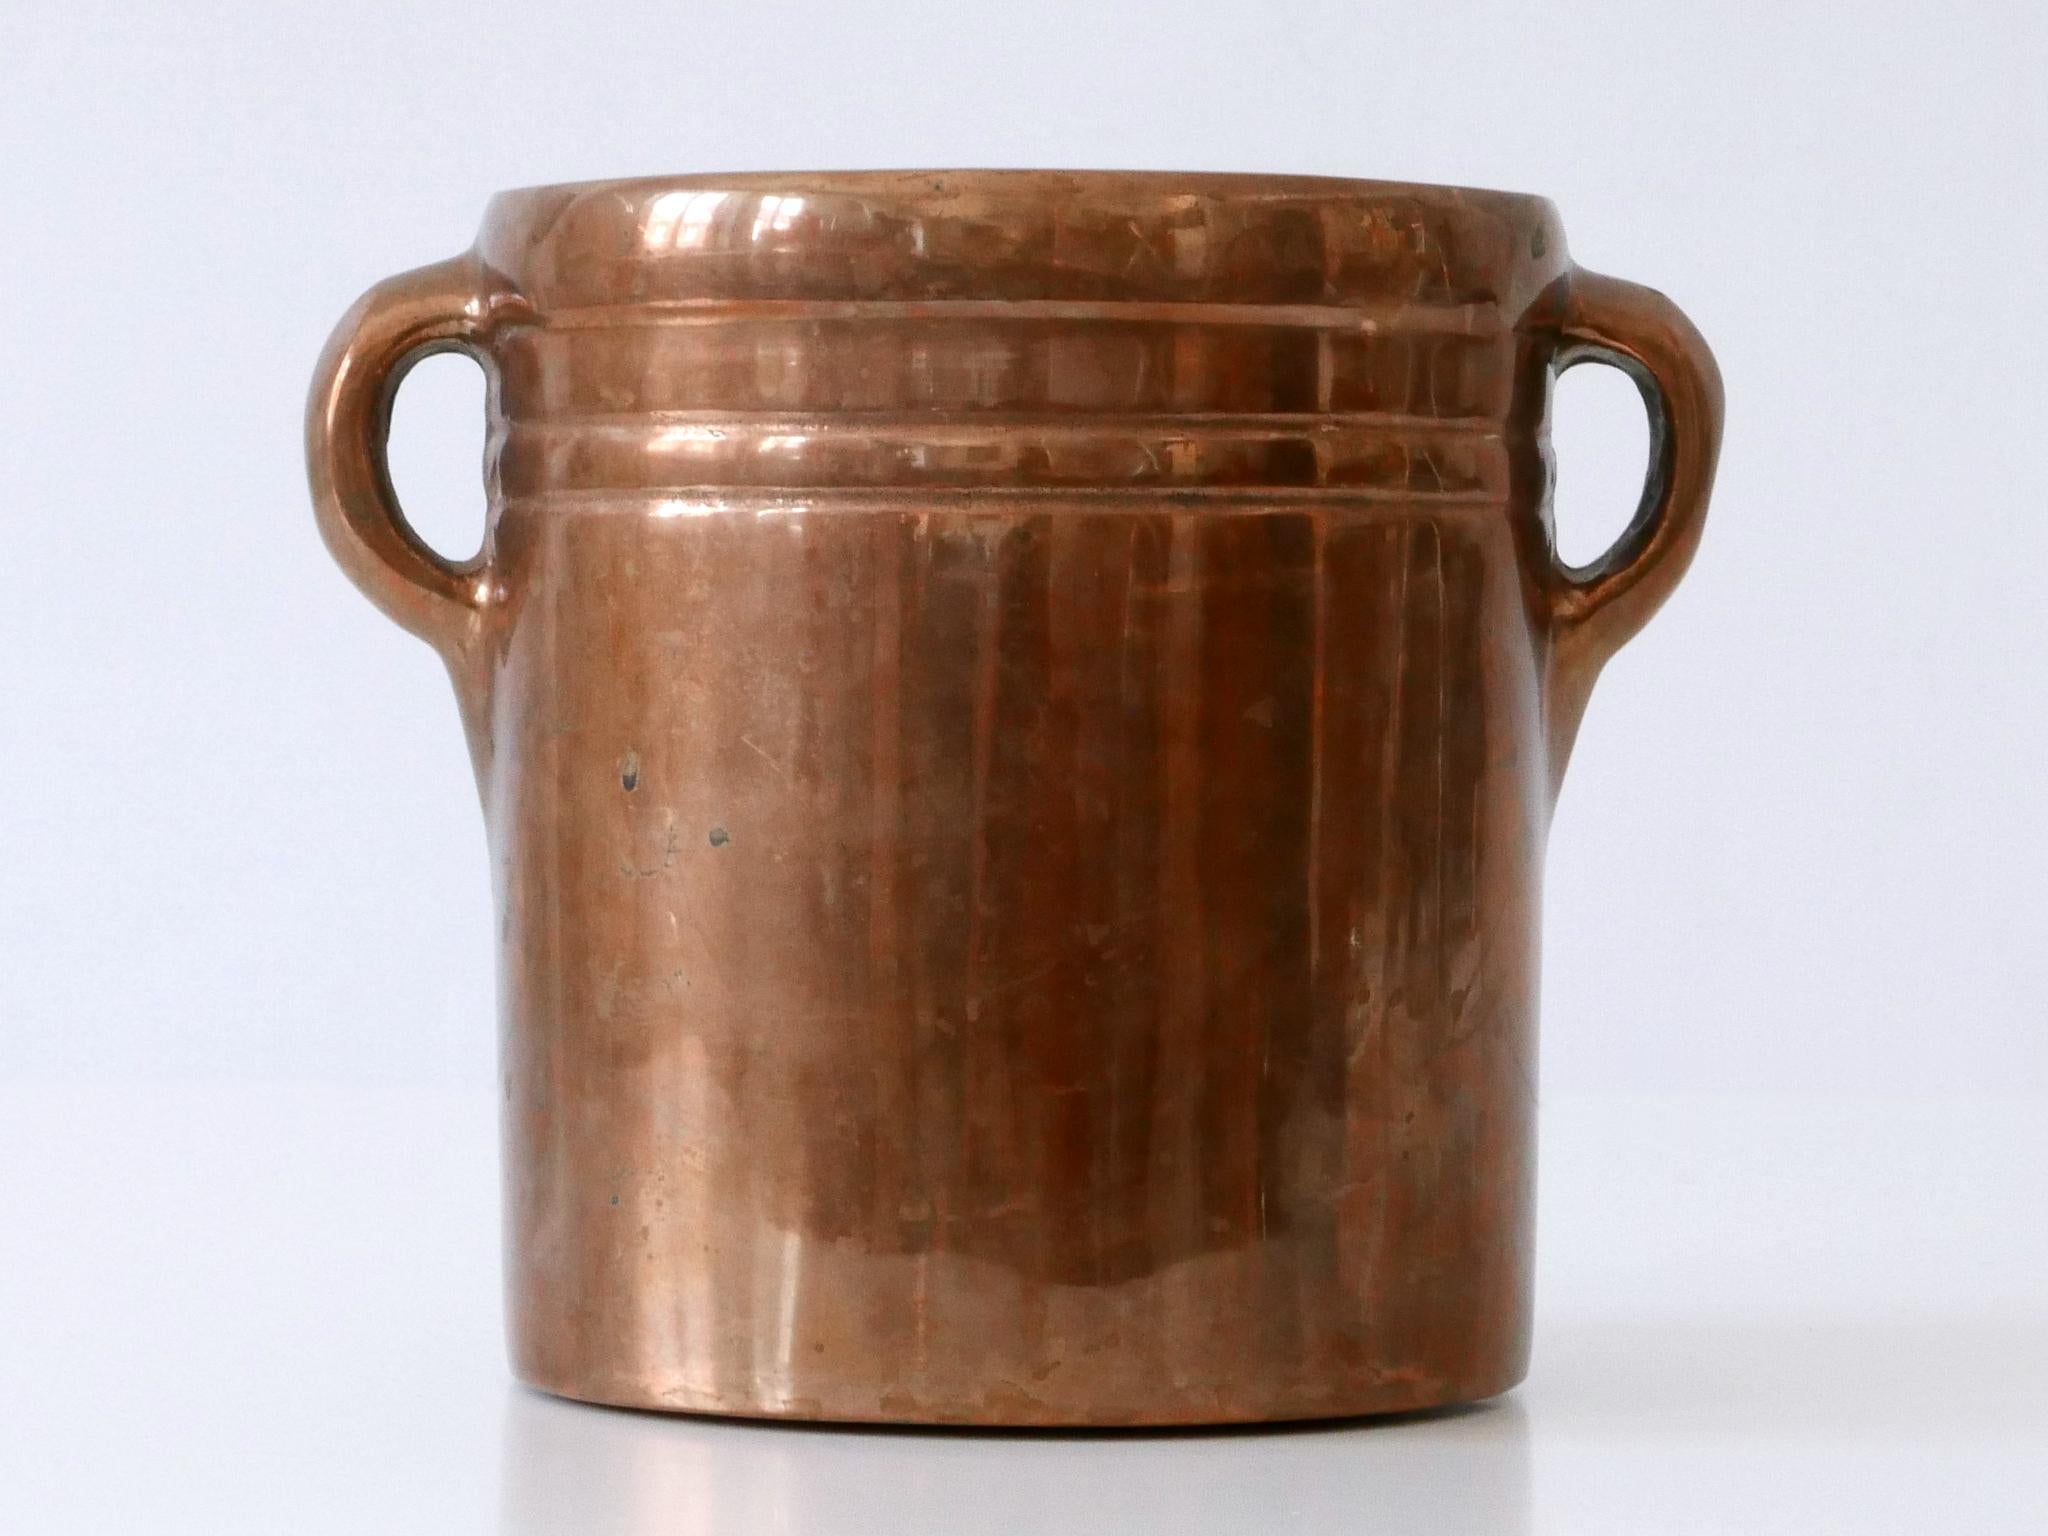 Cast Exceptional Bronze Champagne Cooler or Ice Bucket by Esa Fedrigolli for Esart For Sale